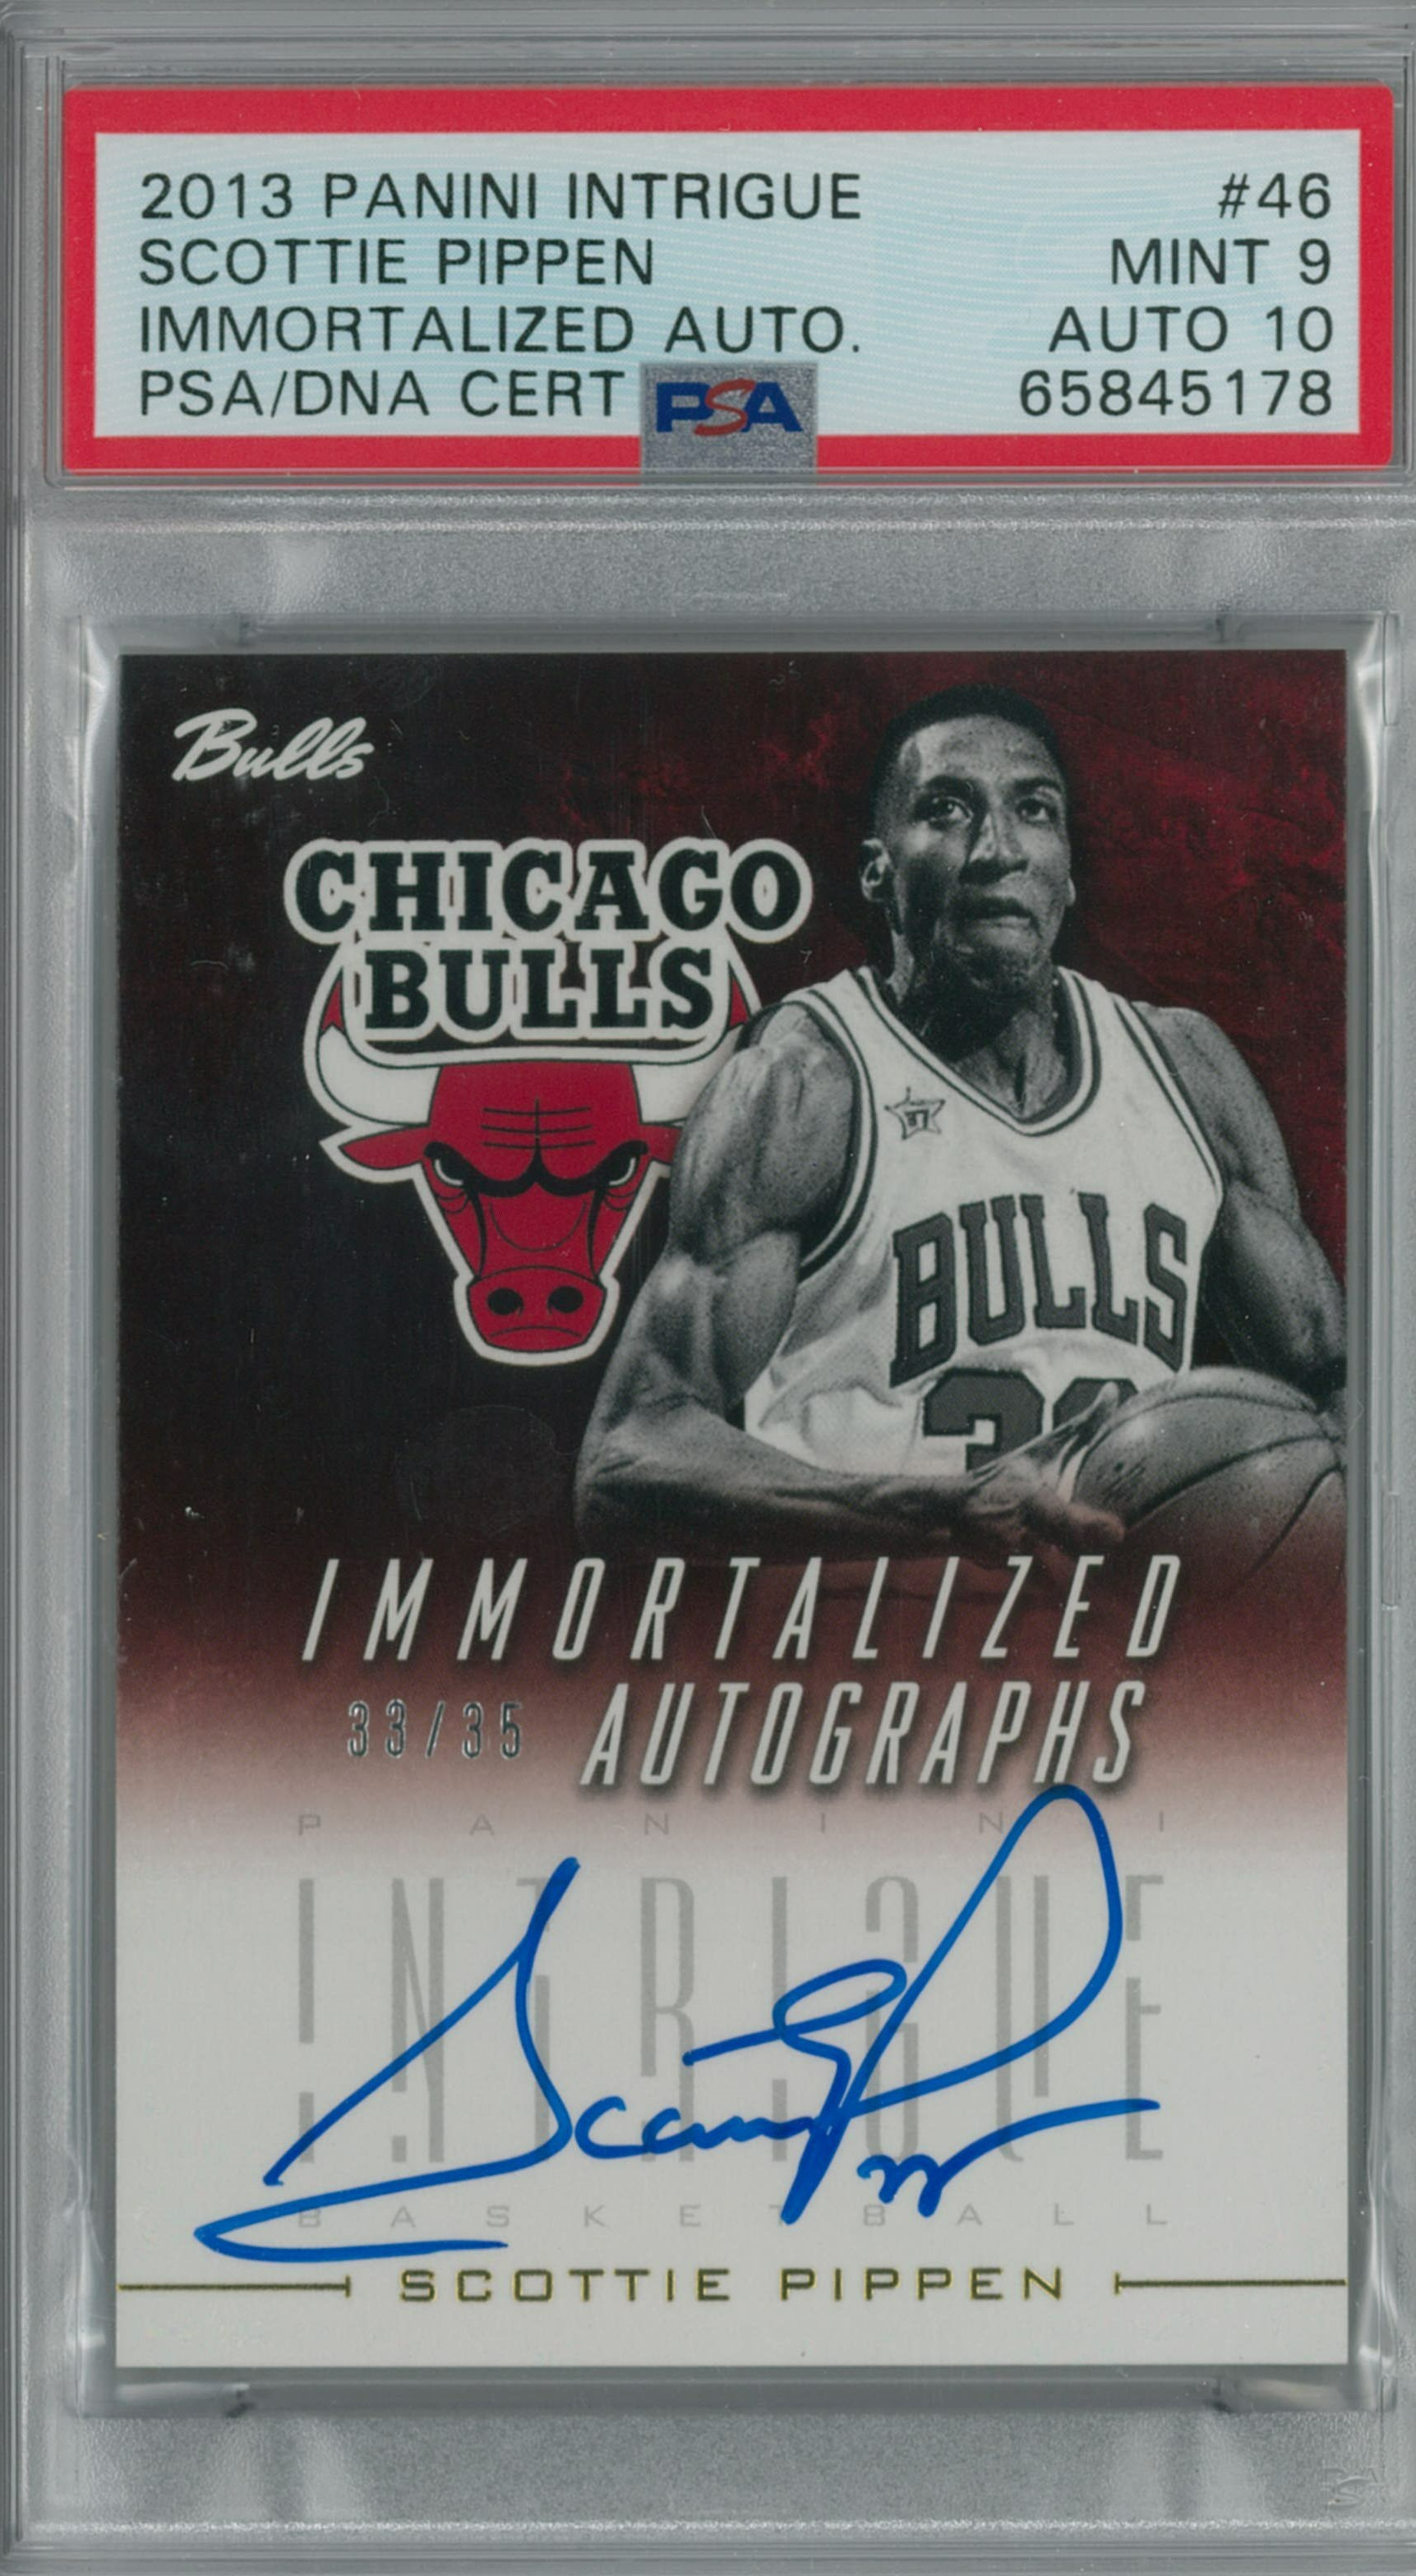 2013 Panini Intrigue Immportalized Autographs 33of35.jpg